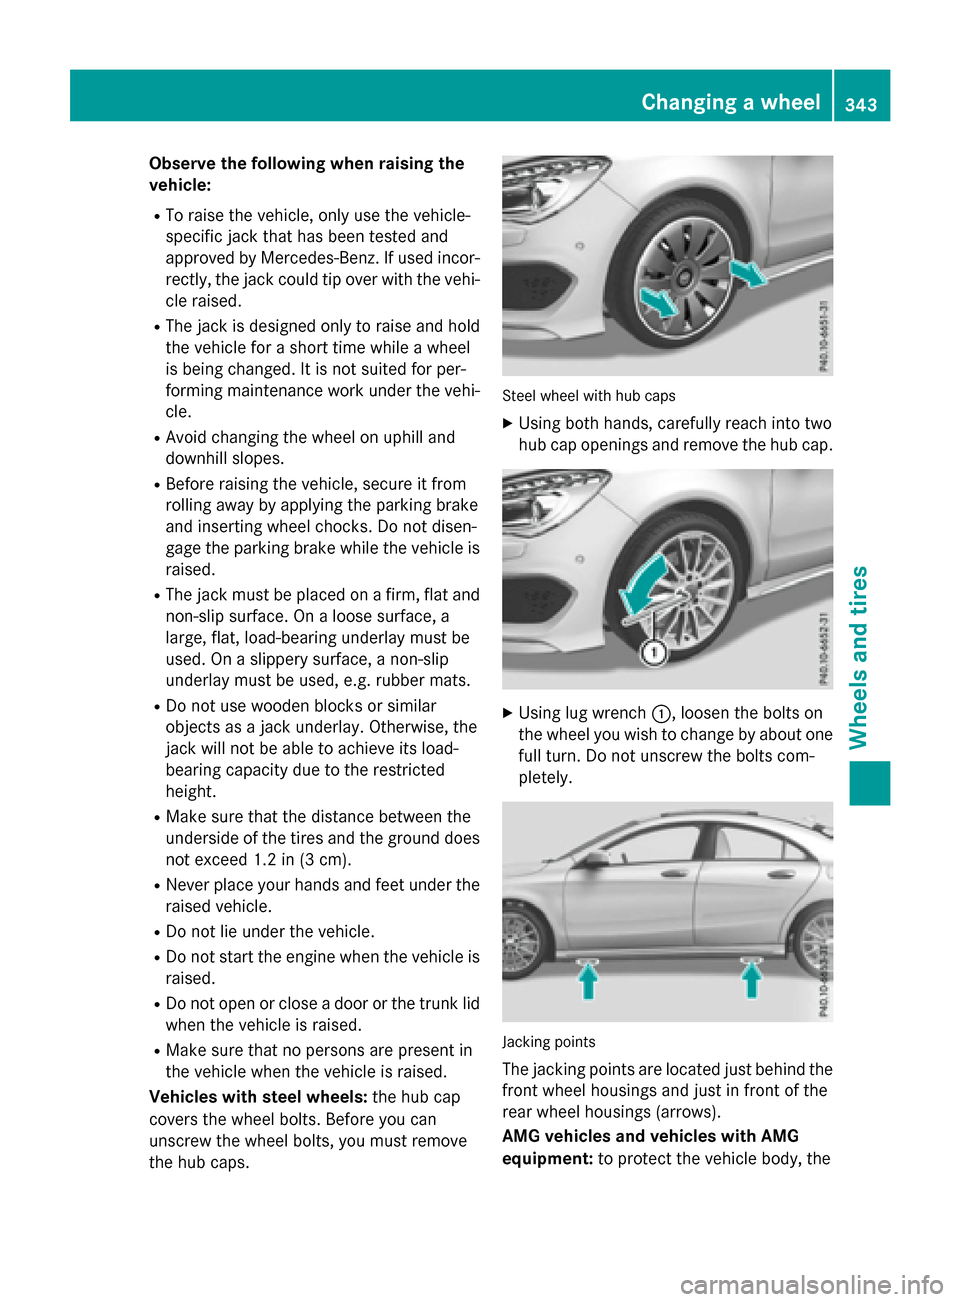 MERCEDES-BENZ CLA-Class 2015 C117 Owners Manual Observe the following when raising the
vehicle:
R To raise the vehicle, only use the vehicle-
specific jack that has been tested and
approved by Mercedes-Benz. If used incor-
rectly, the jack could ti